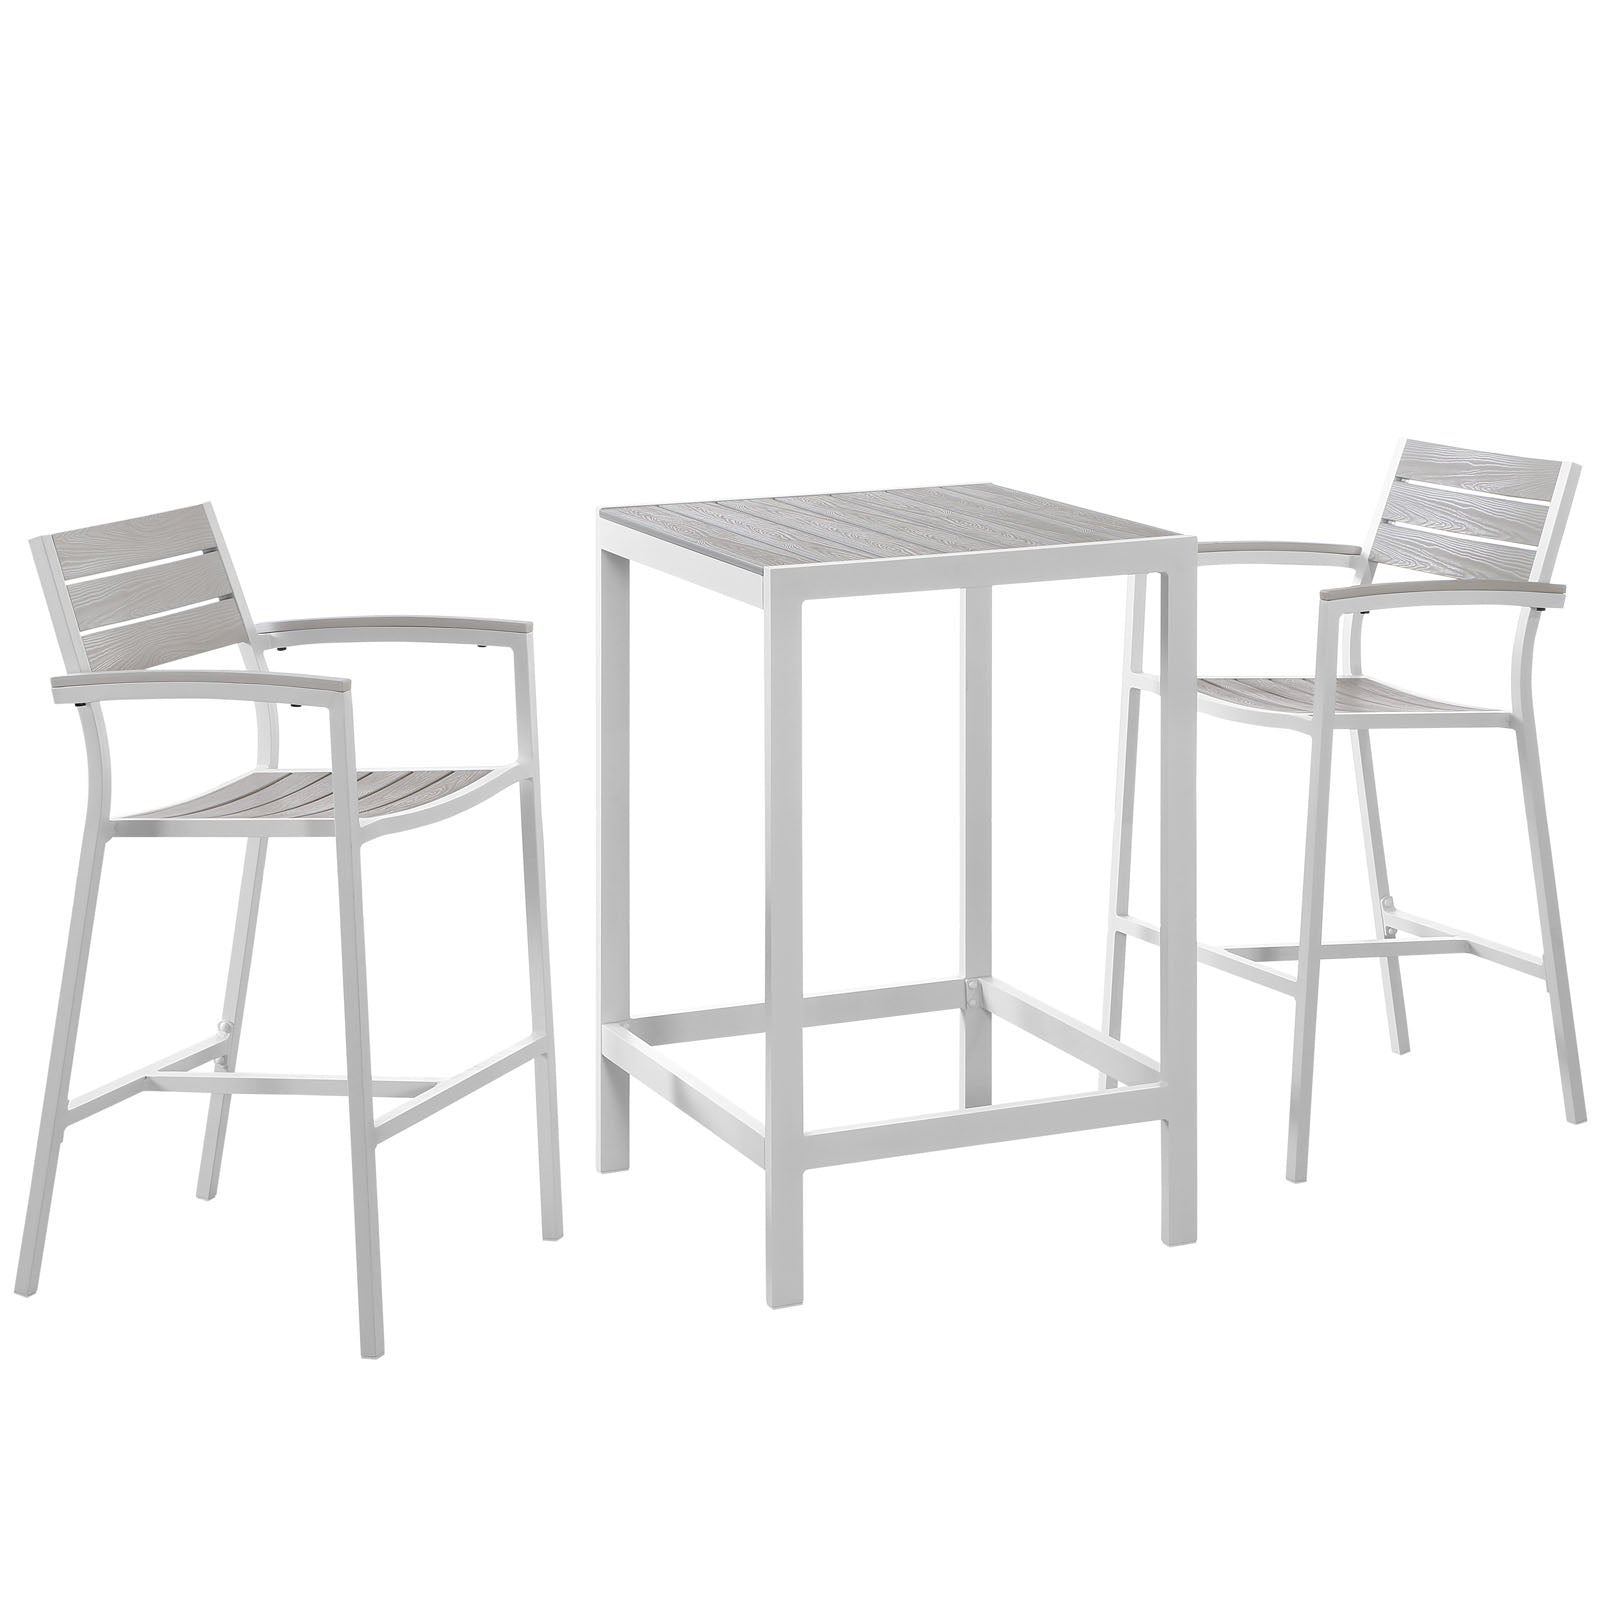 Maine 3 Piece Outdoor Patio Dining Set-Outdoor Dining Set-Modway-Wall2Wall Furnishings